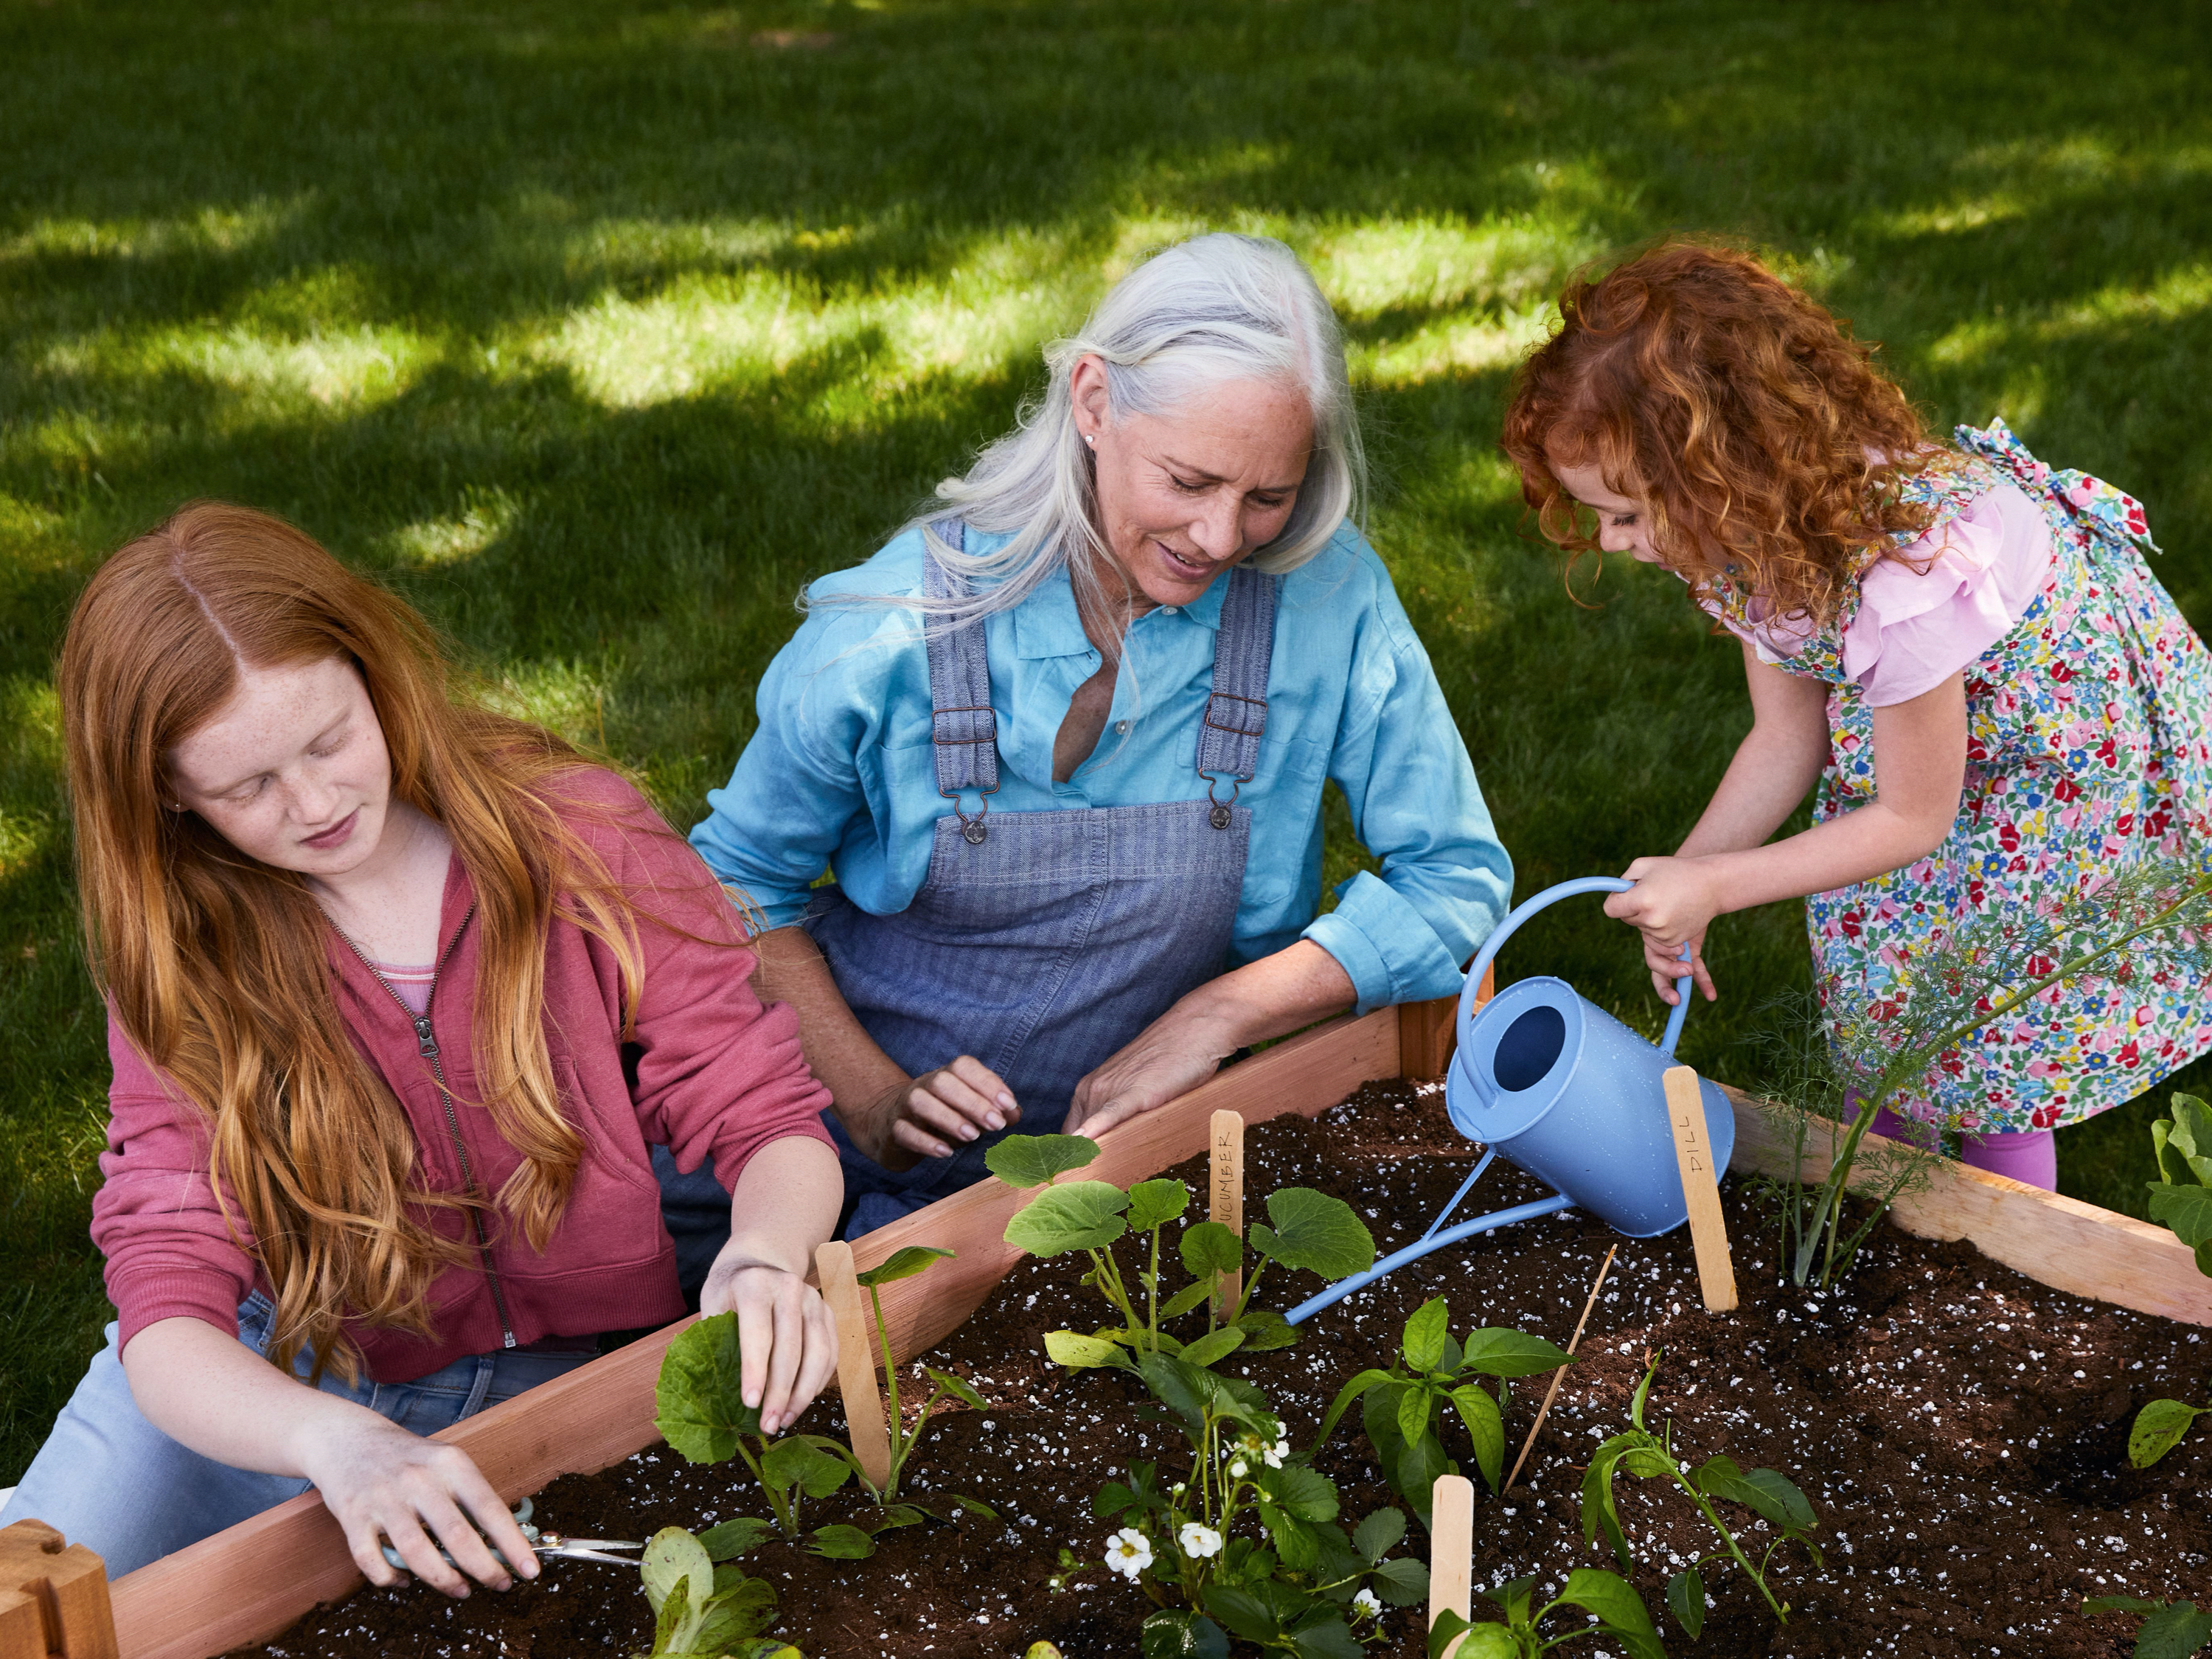 A woman and two young children outside tending to their garden box. One child is clipping herbs while the other waters the soil.